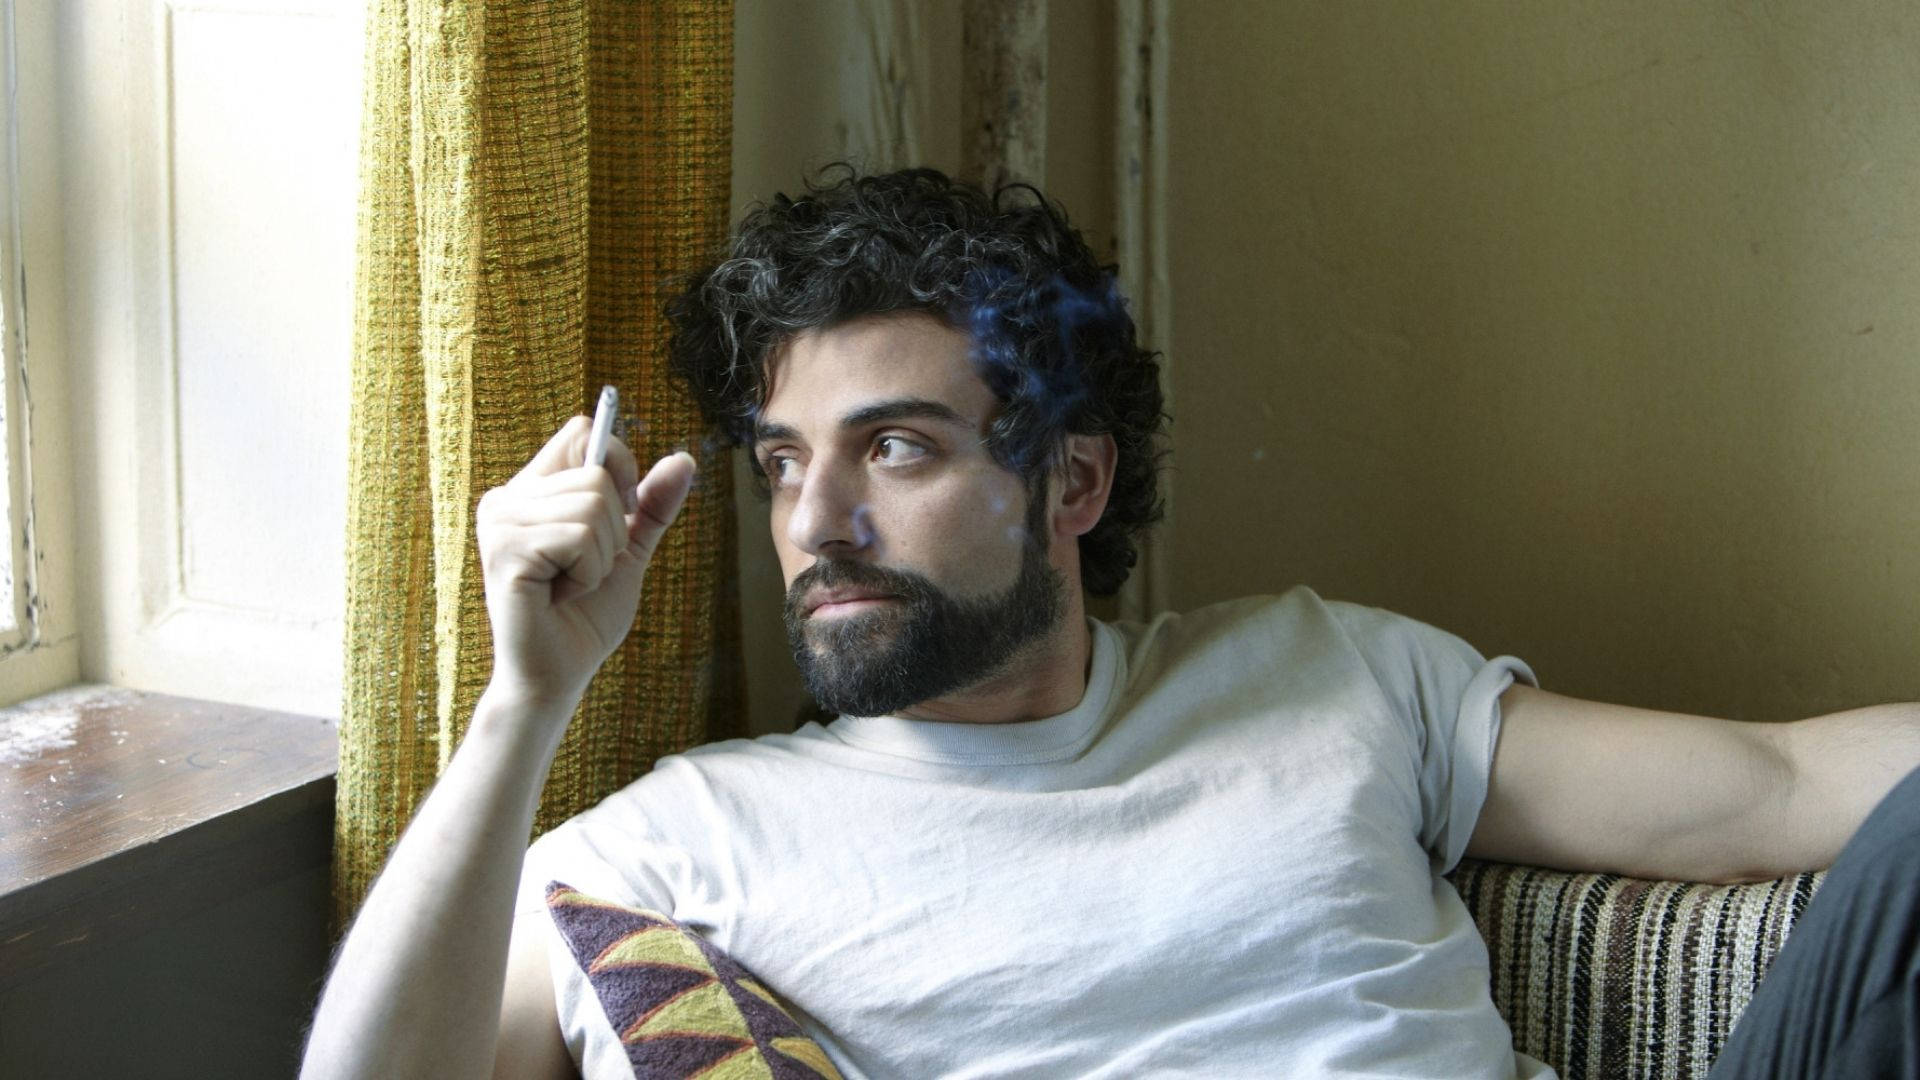 Oscarisaac Tittar Ut - That Would Be A Direct Translation, But For Computer Or Mobile Wallpaper Context It Could Simply Be 